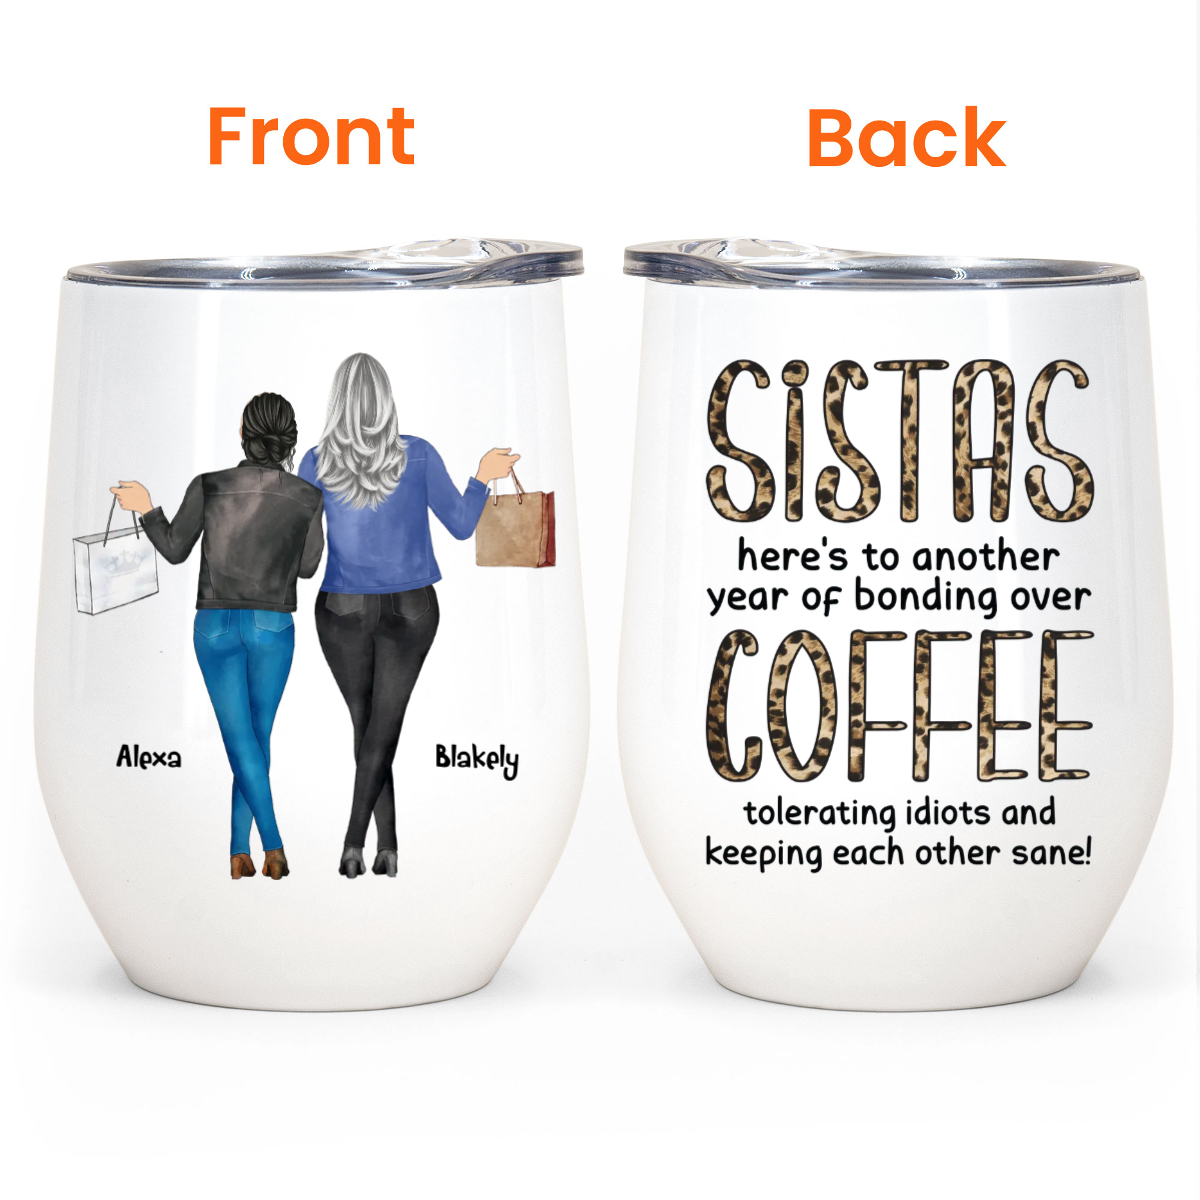 Besties, Alcohol Tolerating, Bonding Over, Keeping Each Other Sane - Personalized Wine Tumbler - Birthday, New Year Gift For Besties, Soul Sisters, Sistas, BFF, Friends